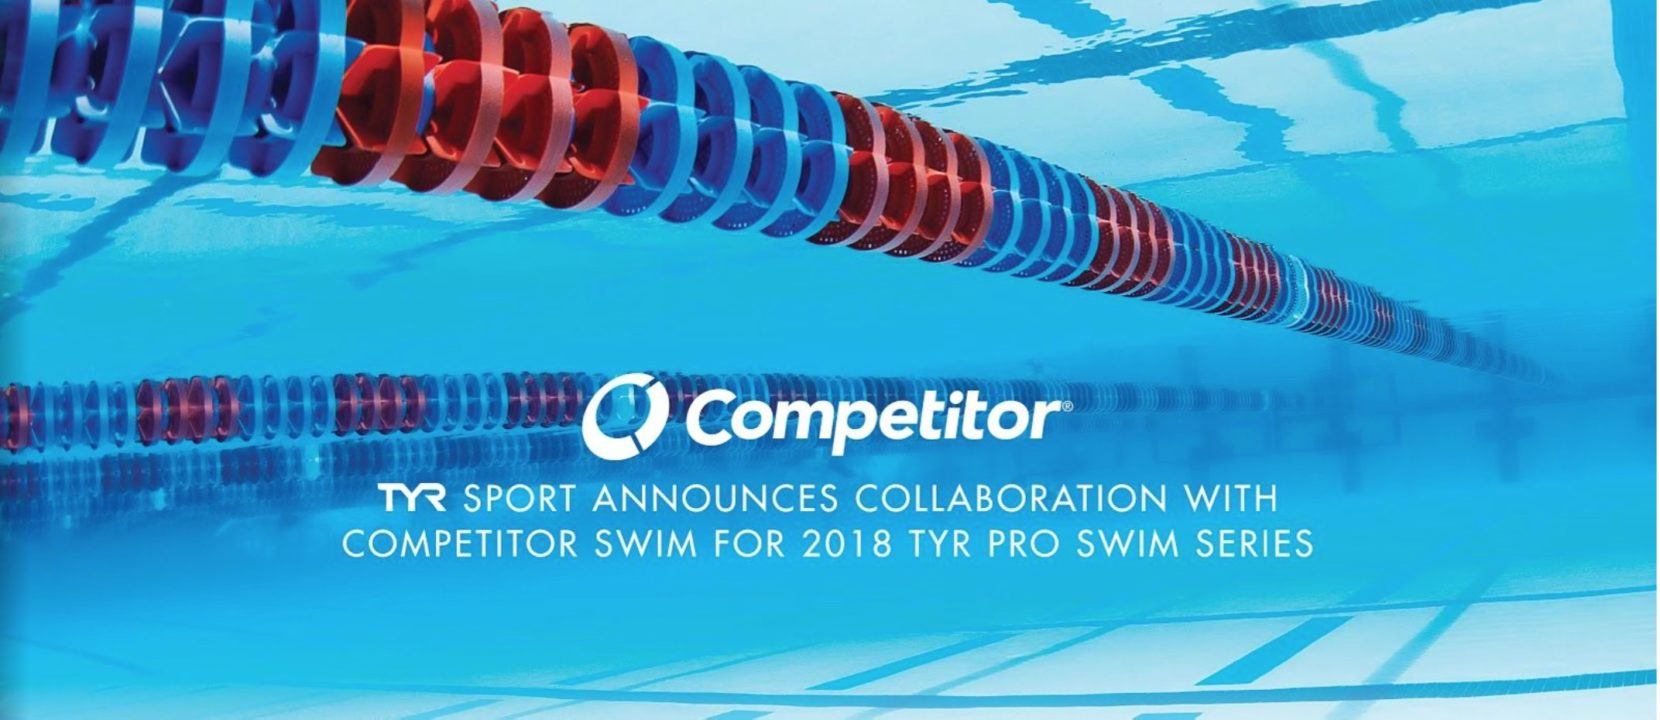 TYR Announces Collaboration With Competitor Swim For Pro Swim Series